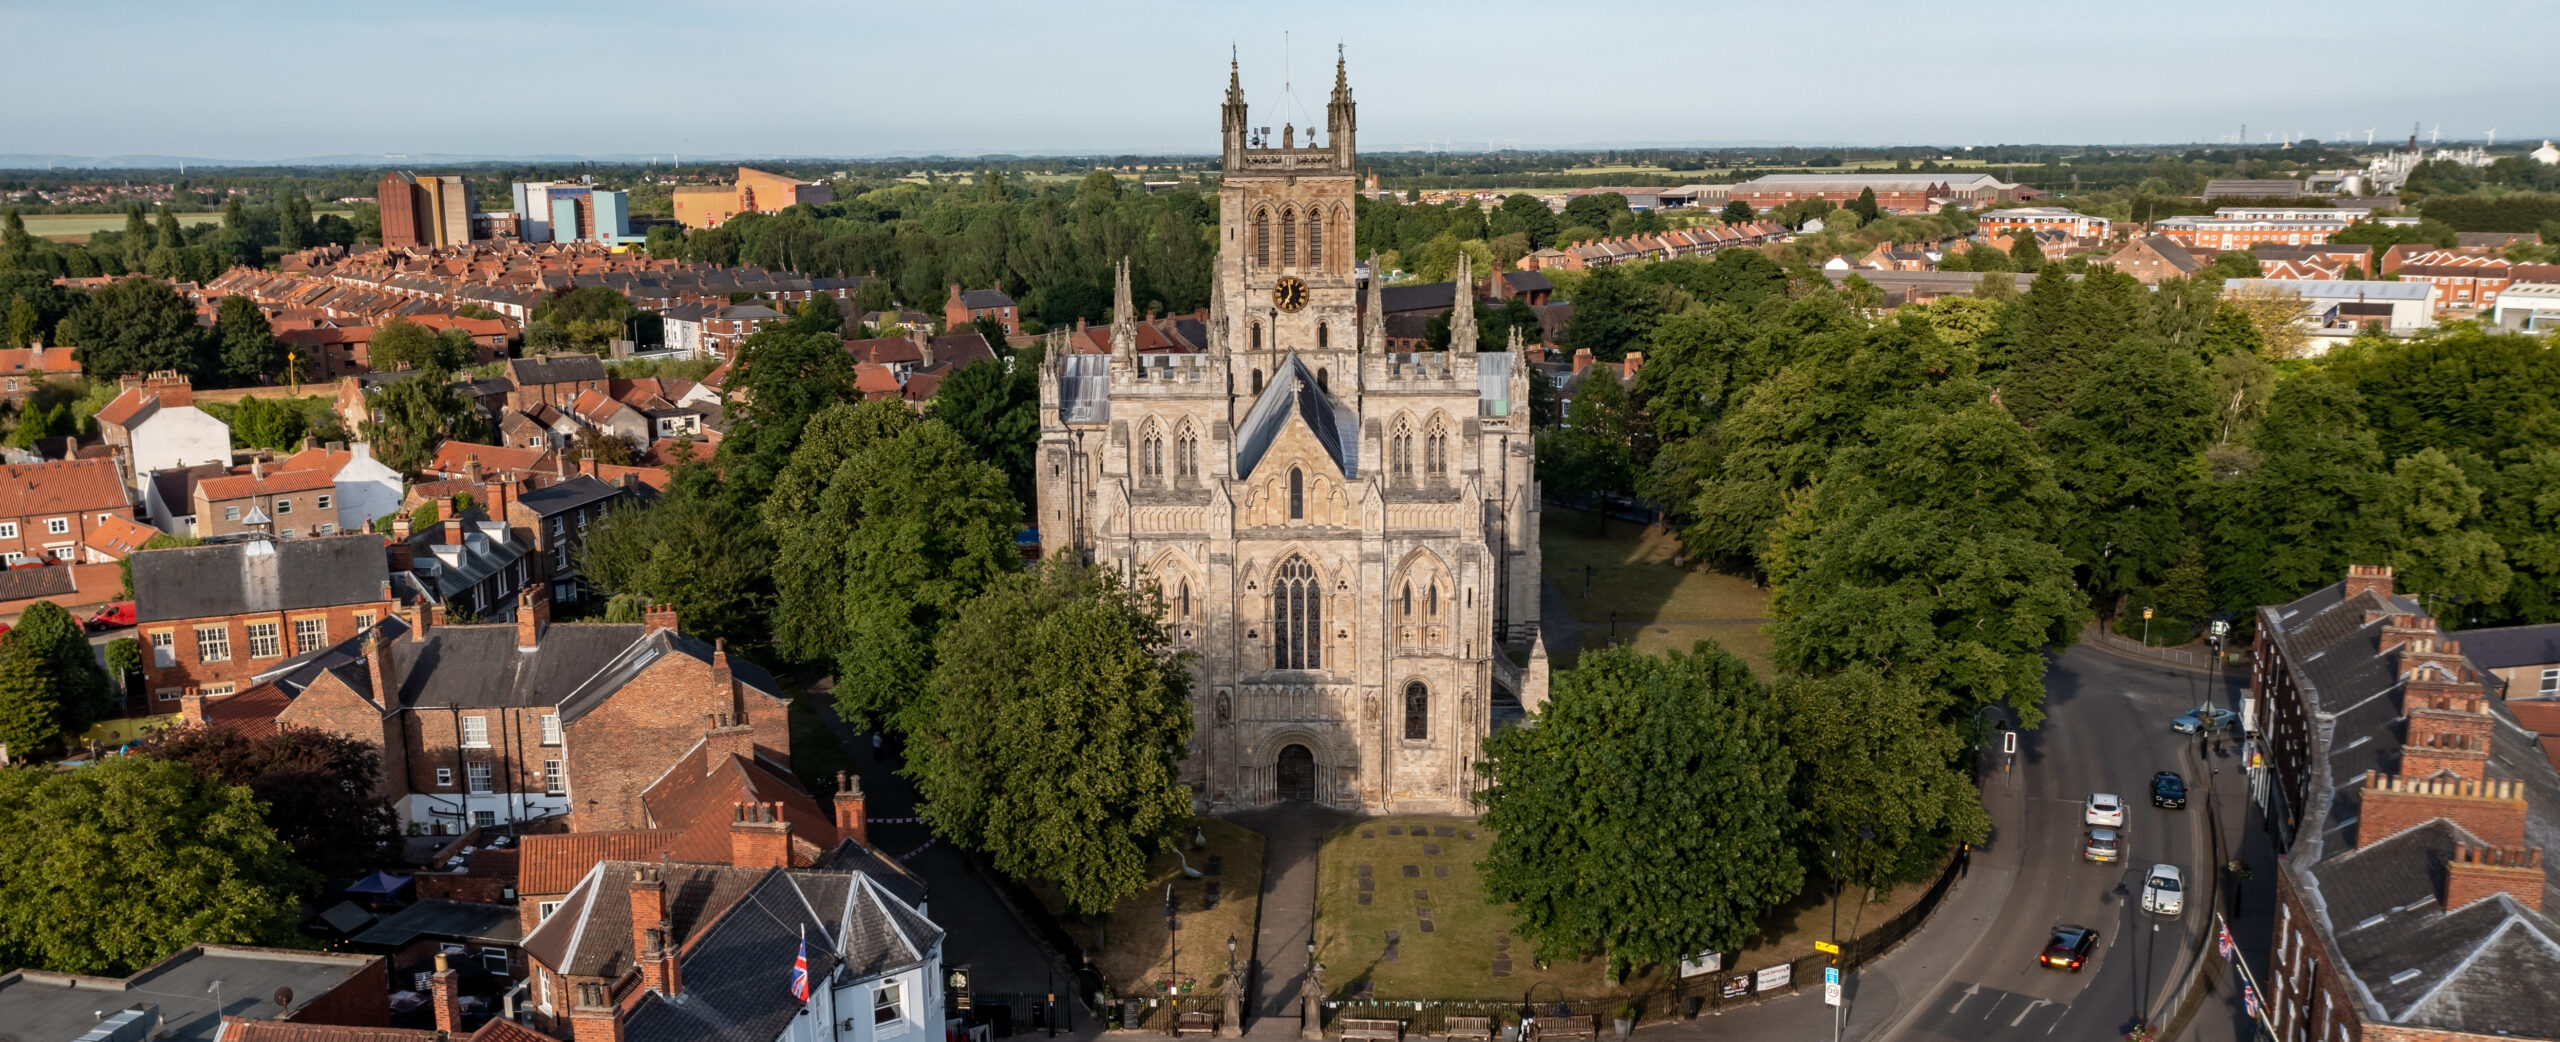 Selby,,Uk,-,June,20,,2022.,An,Aerial,Skyline,Of